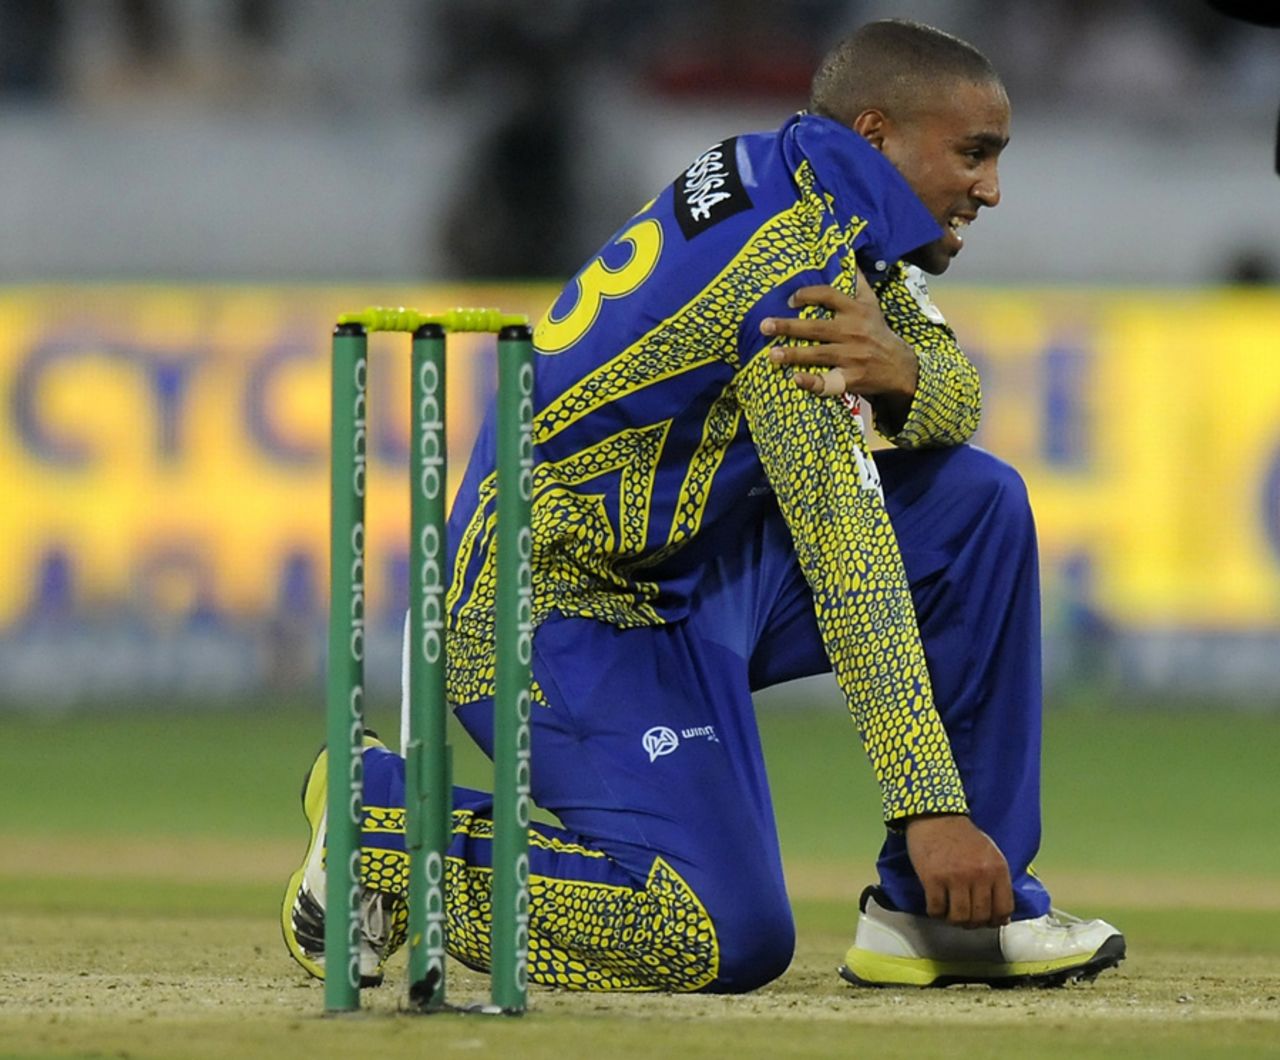 Dane Piedt injured his right arm while trying to field off his own bowling, Cape Cobras v Hobart Hurricanes, Champions League T20, Hyderabad, September 21, 2014